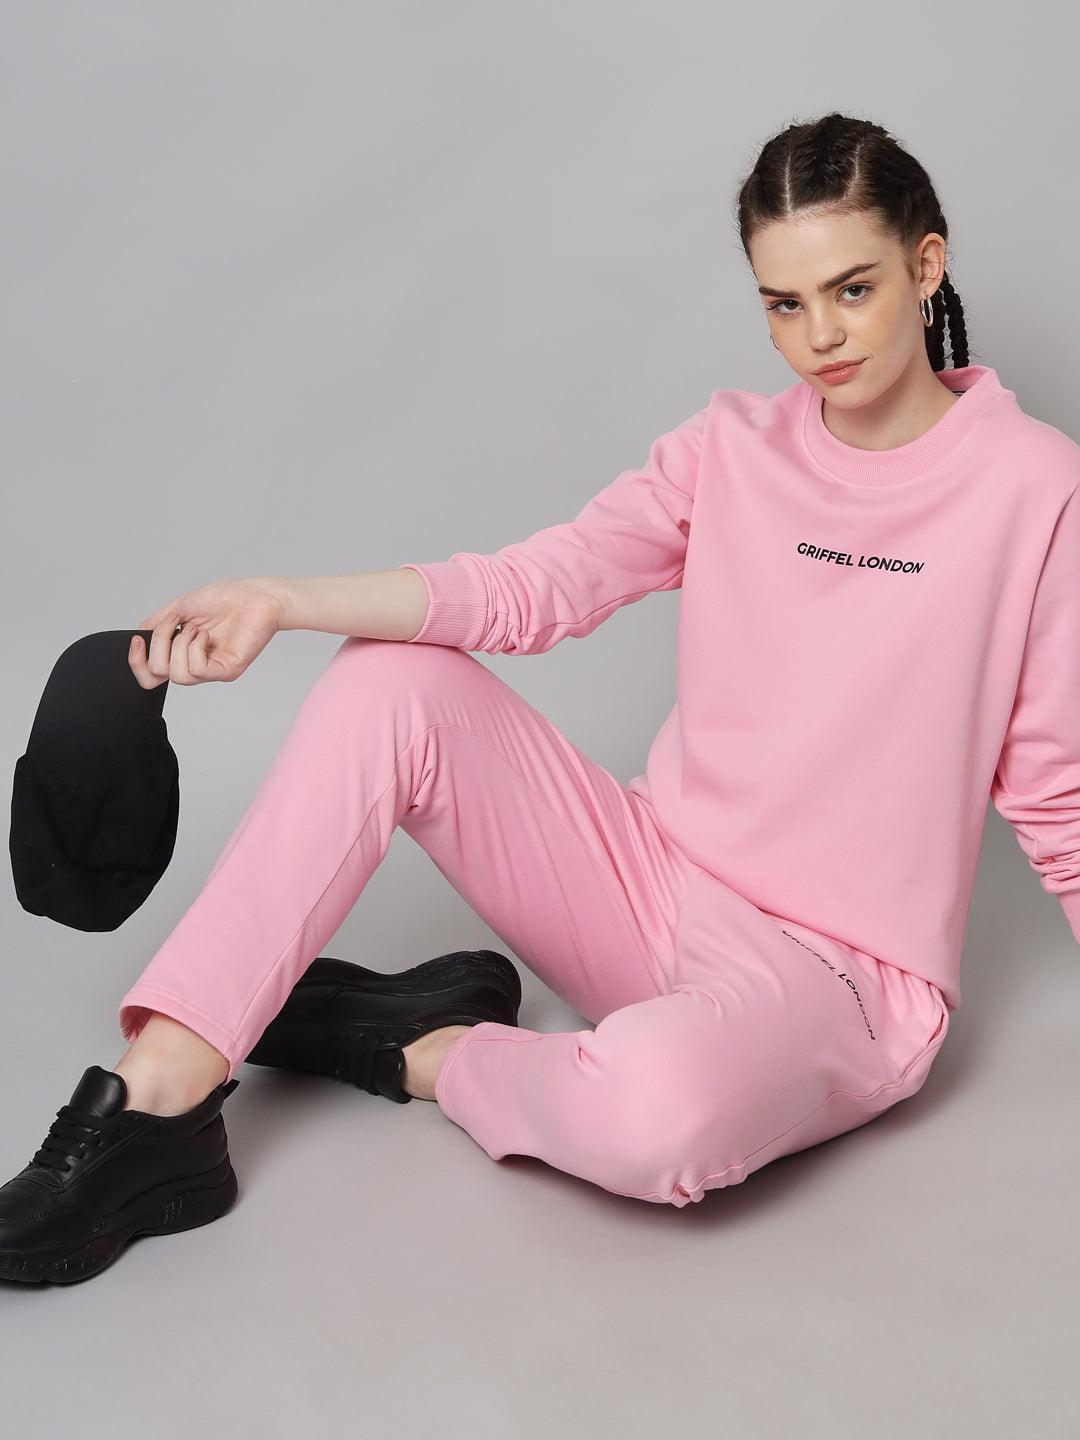 Griffel Women Solid Fleece Basic Round Neck Sweatshirt and Joggers Full set Pink Tracksuit - griffel